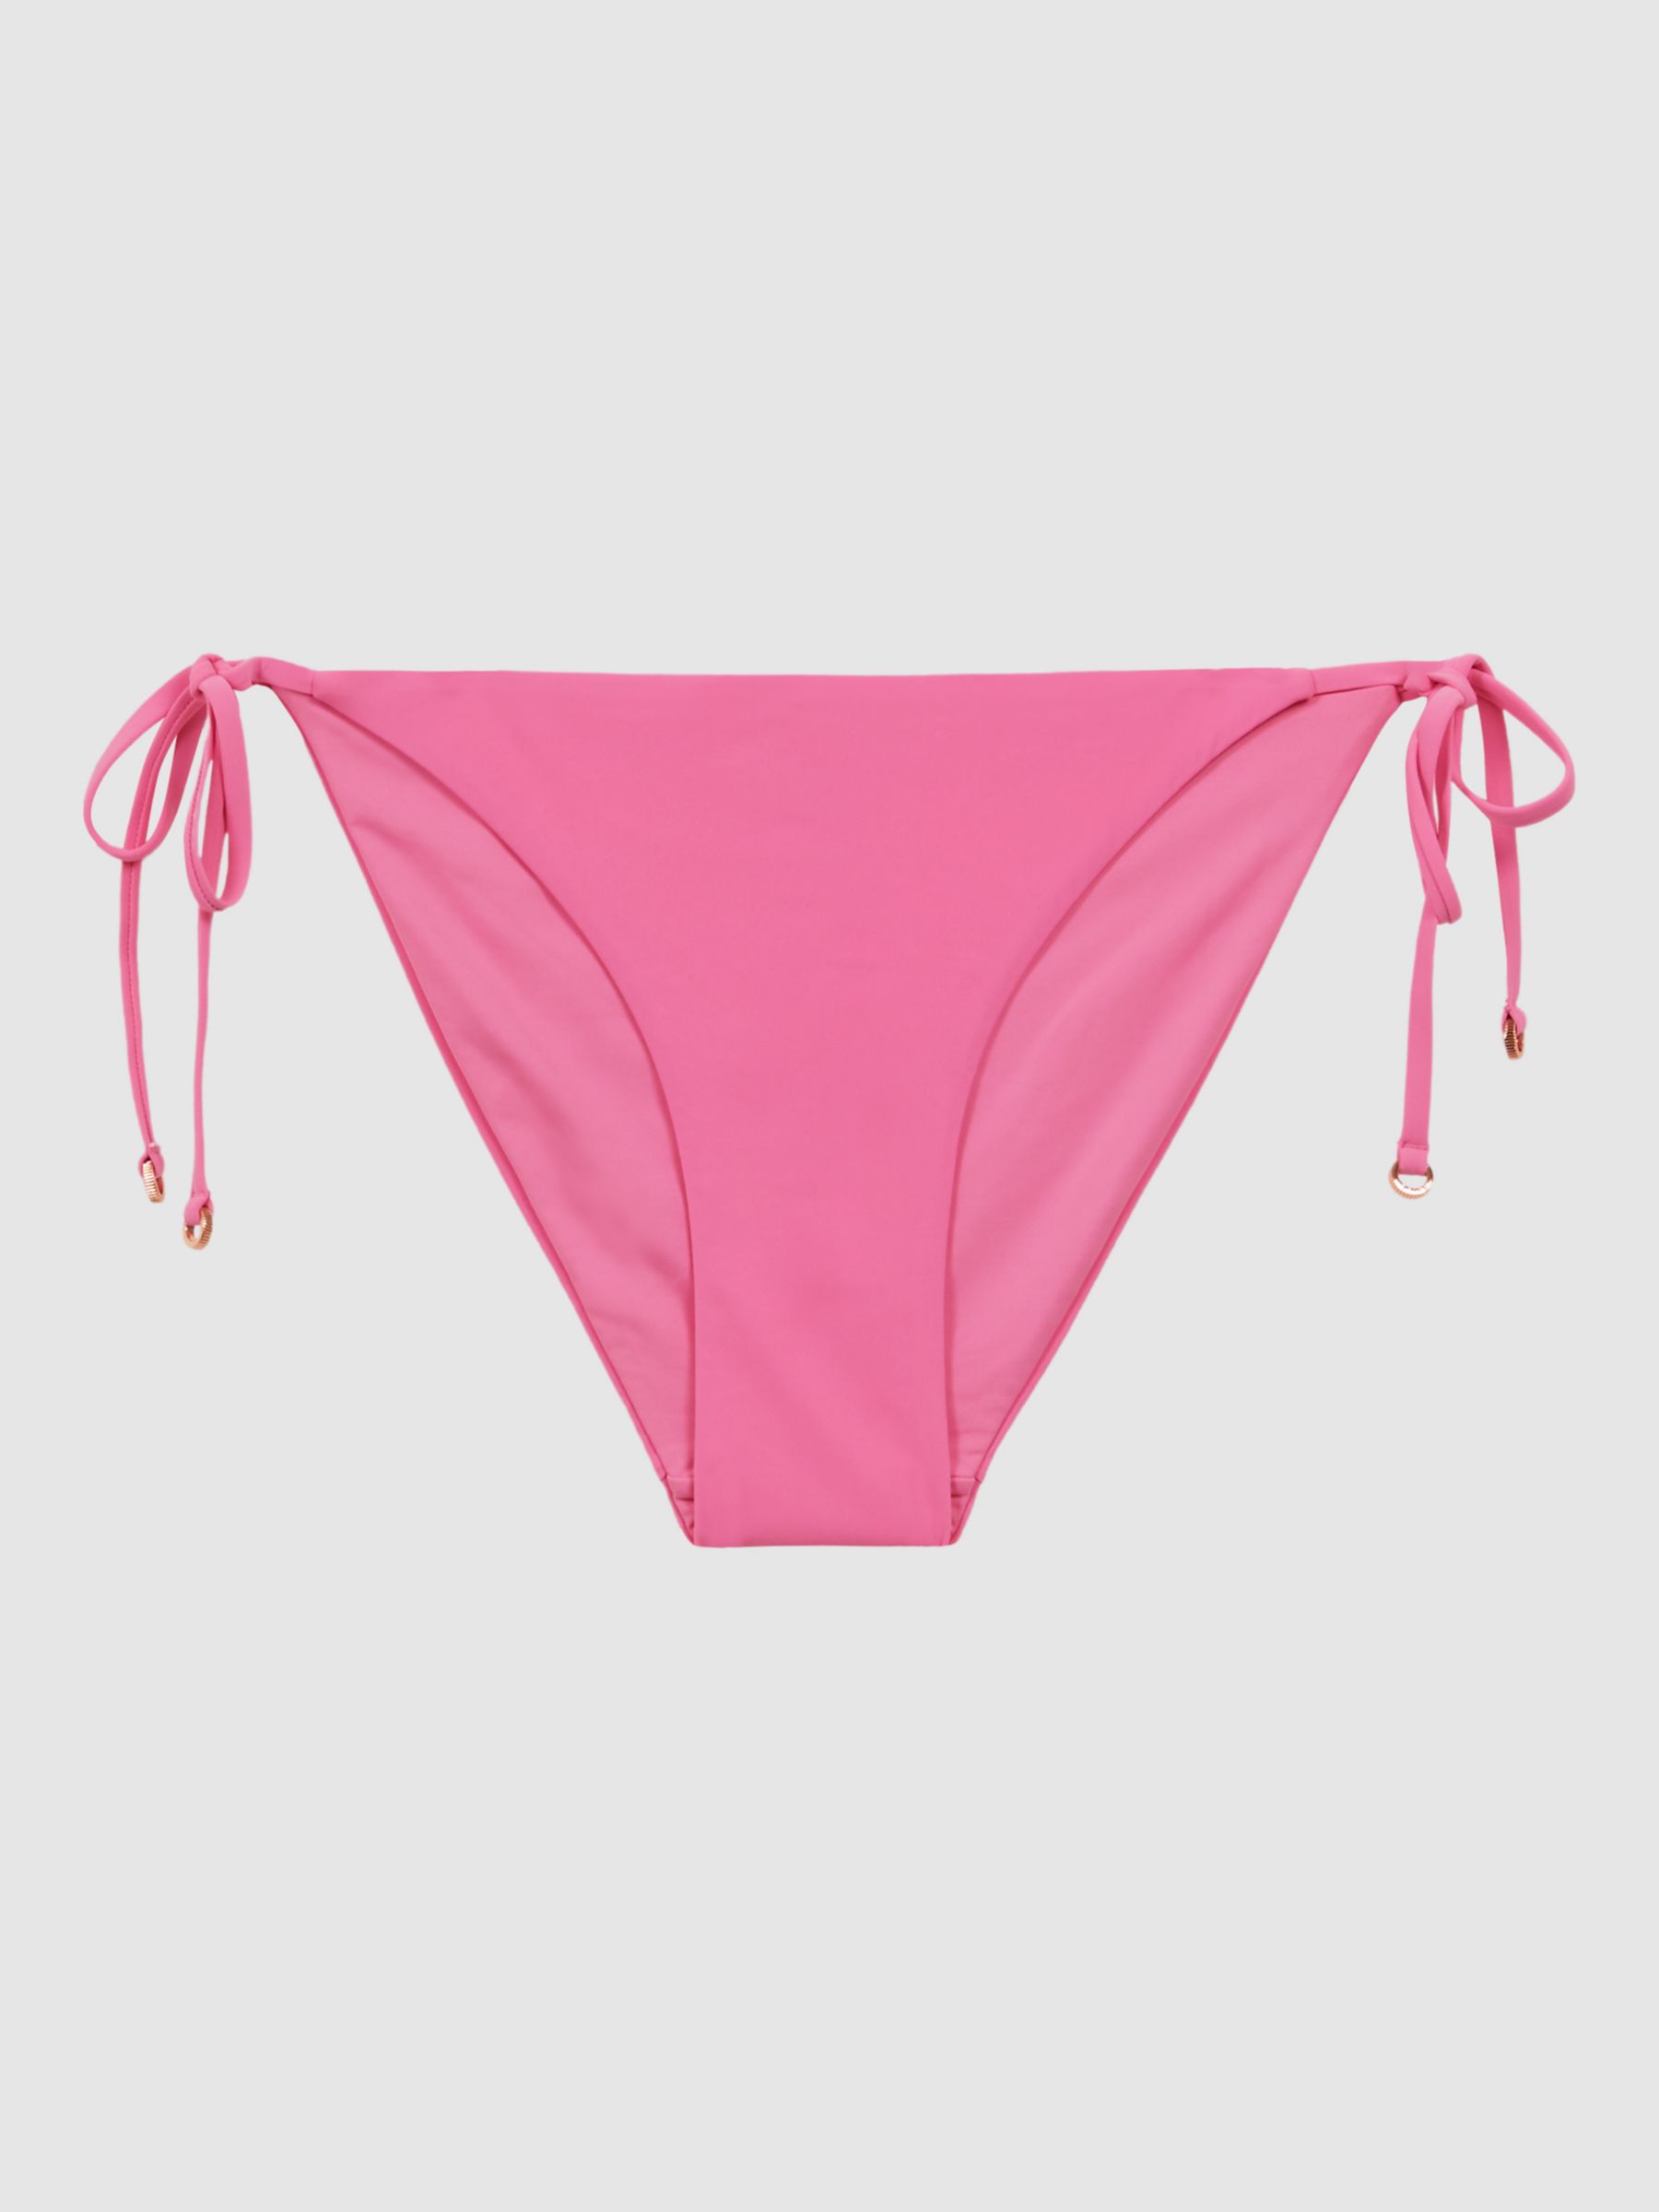 Reiss Ripley Side Tie Bikini Bottoms Pink At John Lewis And Partners